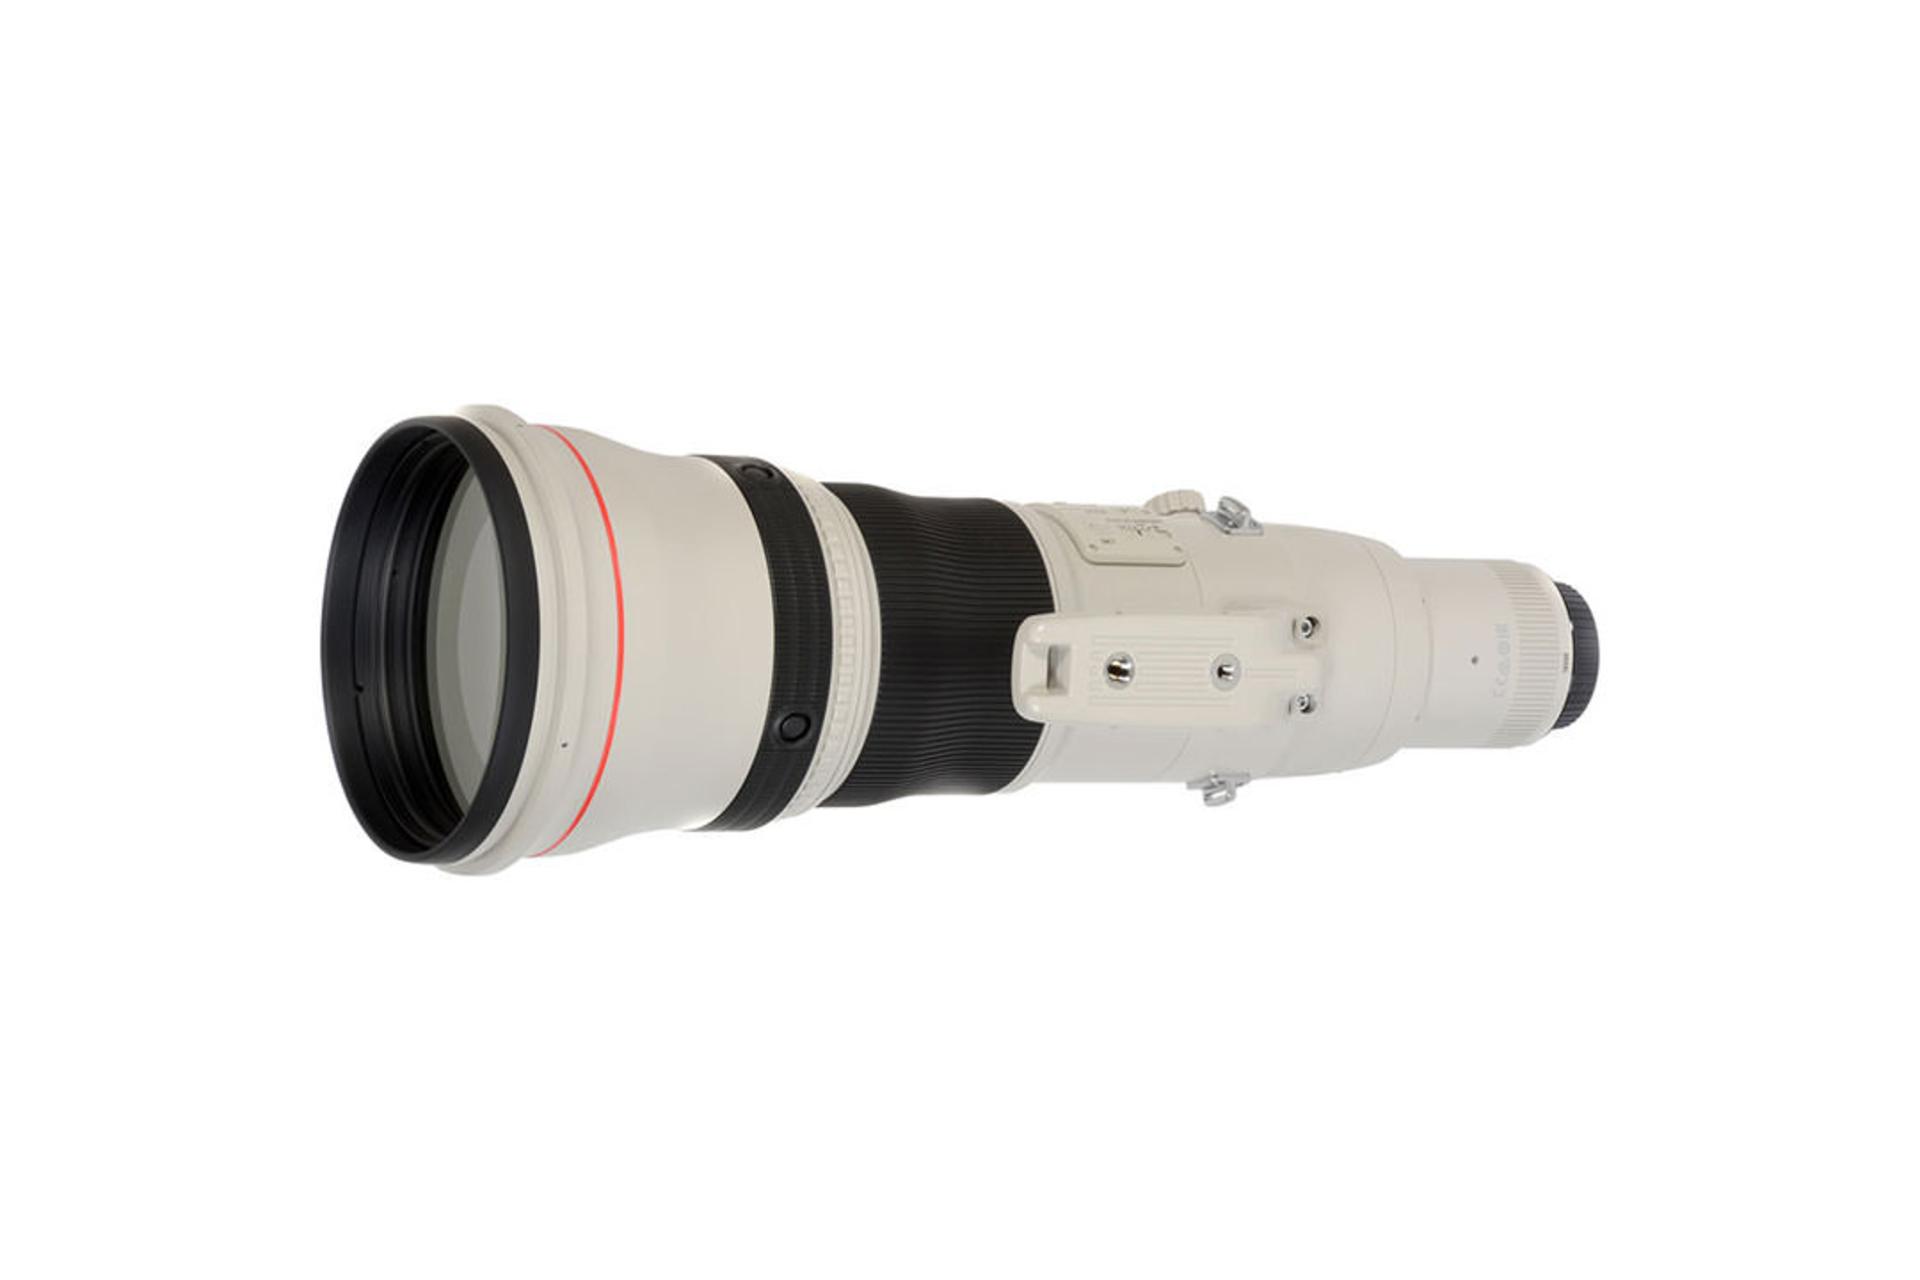 Canon EF 800mm f/5.6L IS USM	